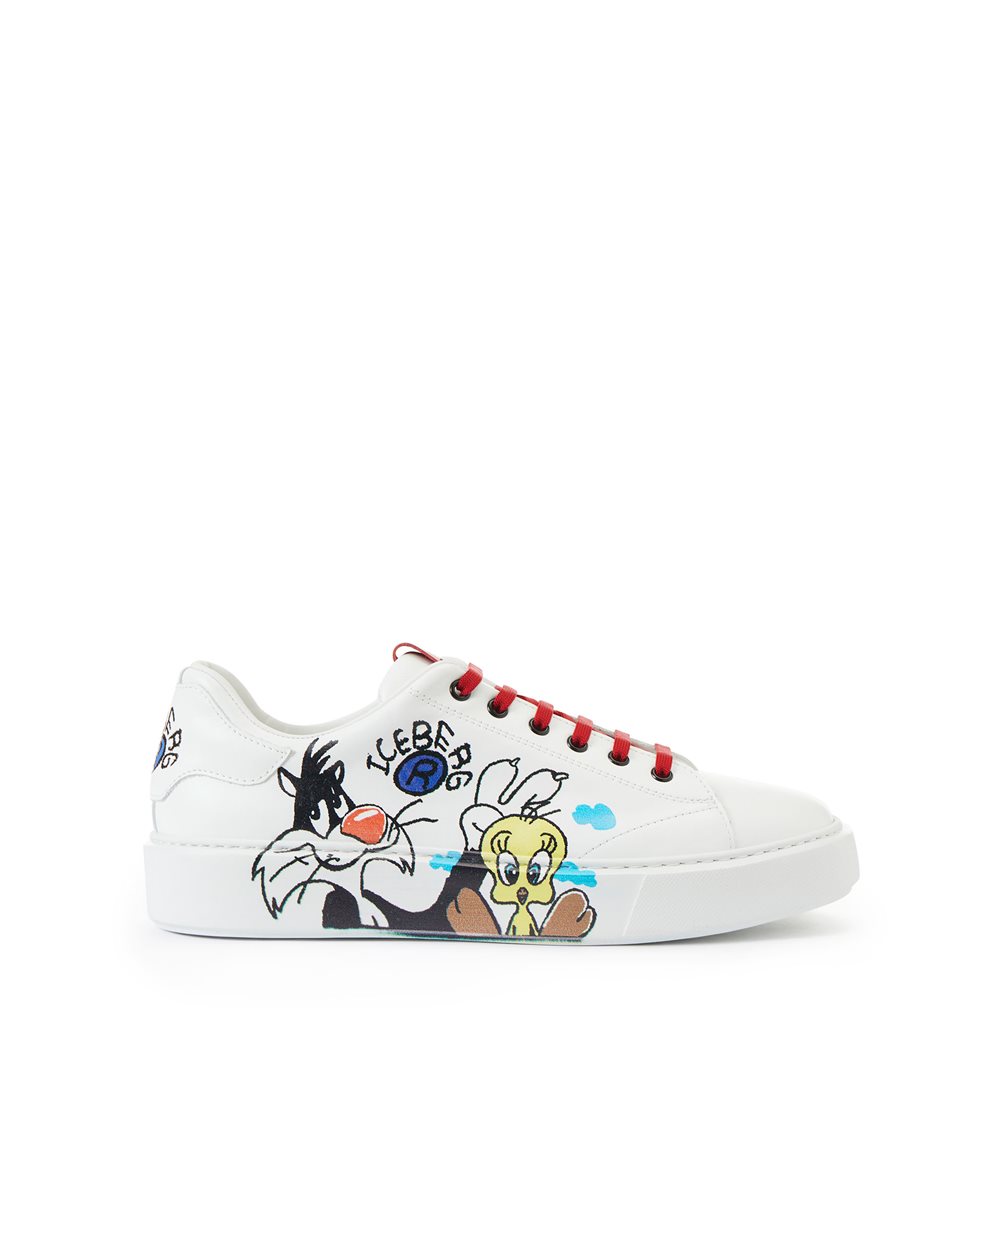 Carson sneakers with logo and cartoon graphics - Accessories | Iceberg - Official Website